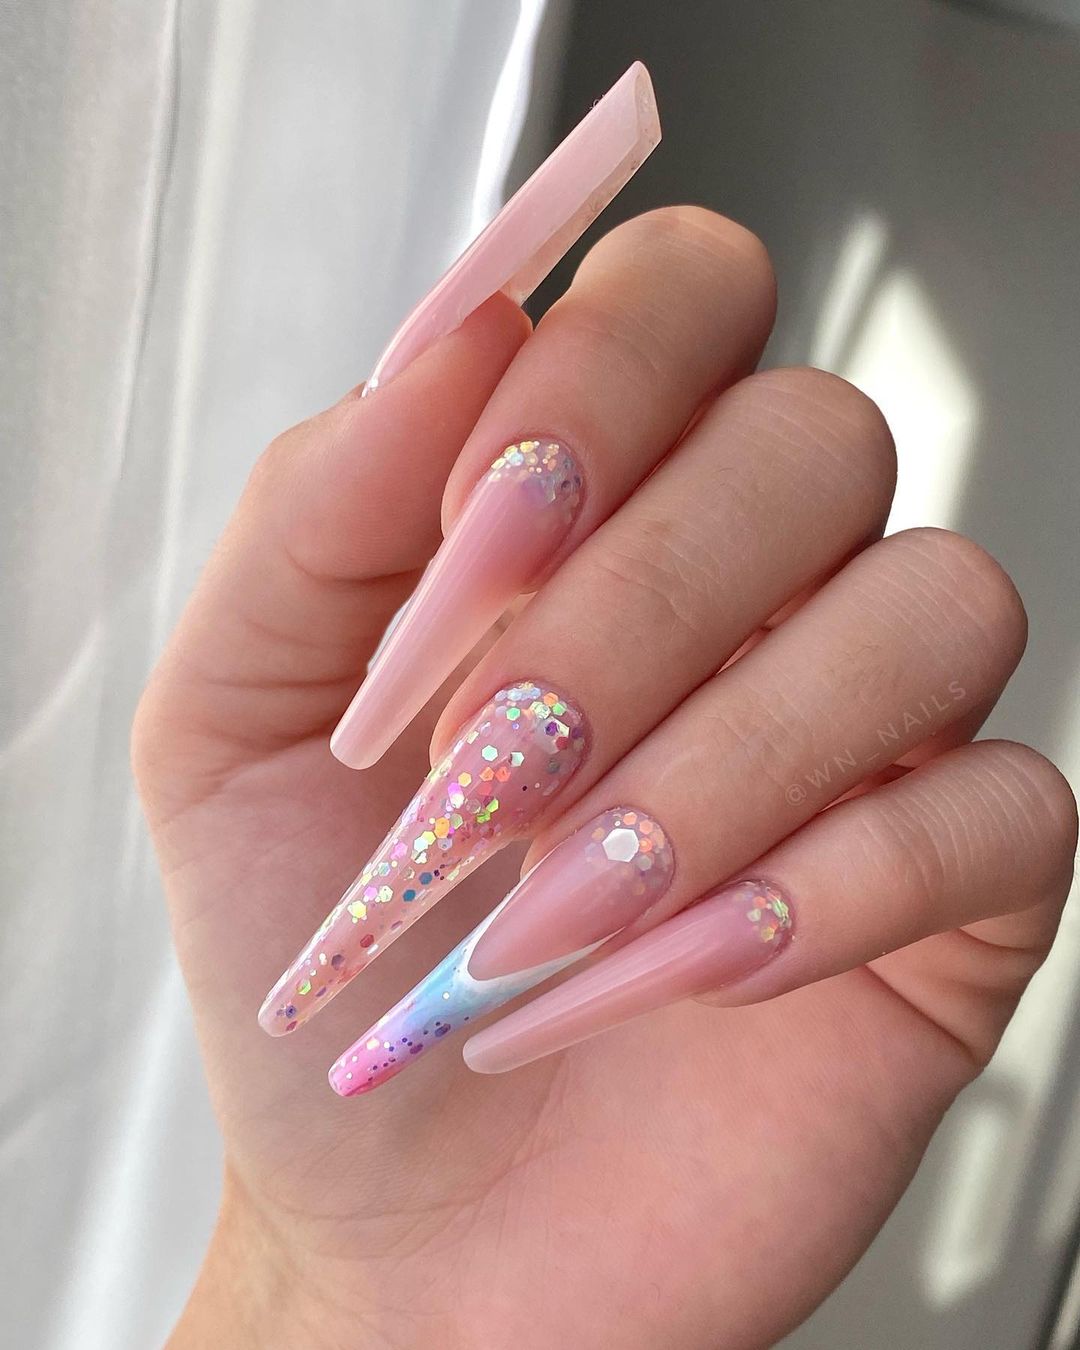 Long Acrylic Nude Stiletto Nails with Glitter